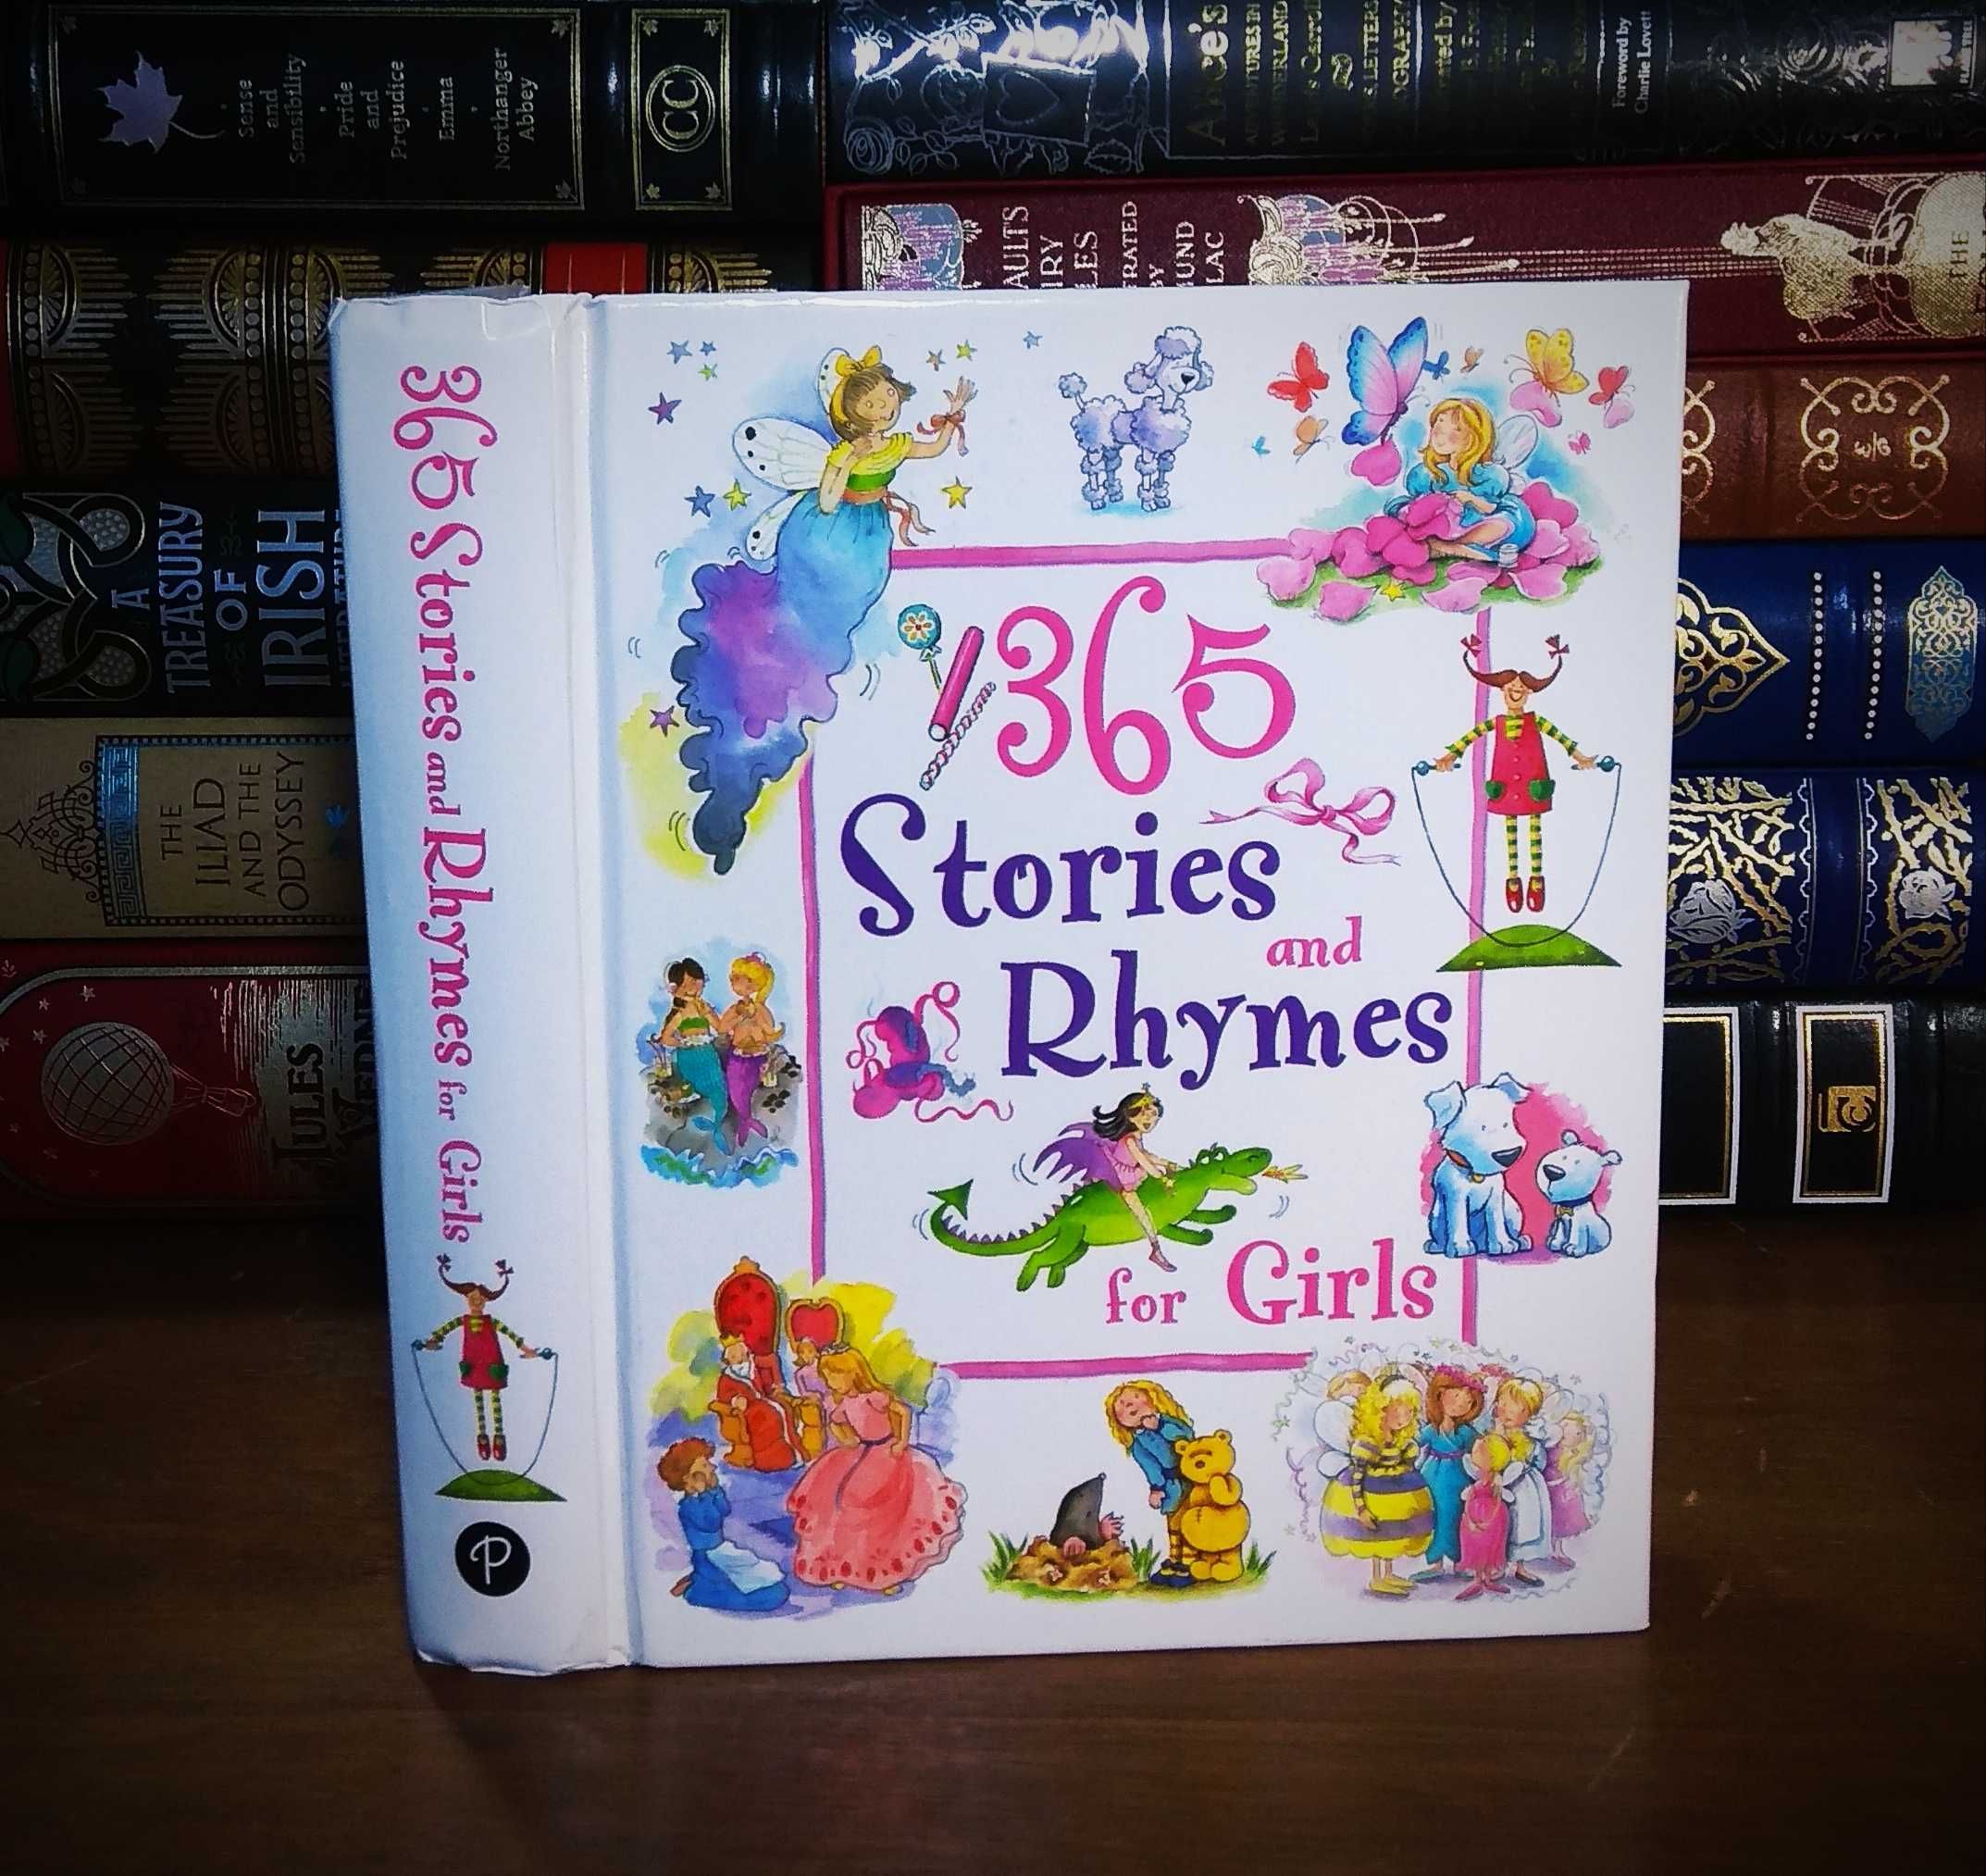 CONTOS INFANTIS - 365 Stories and Rhymes for Girls